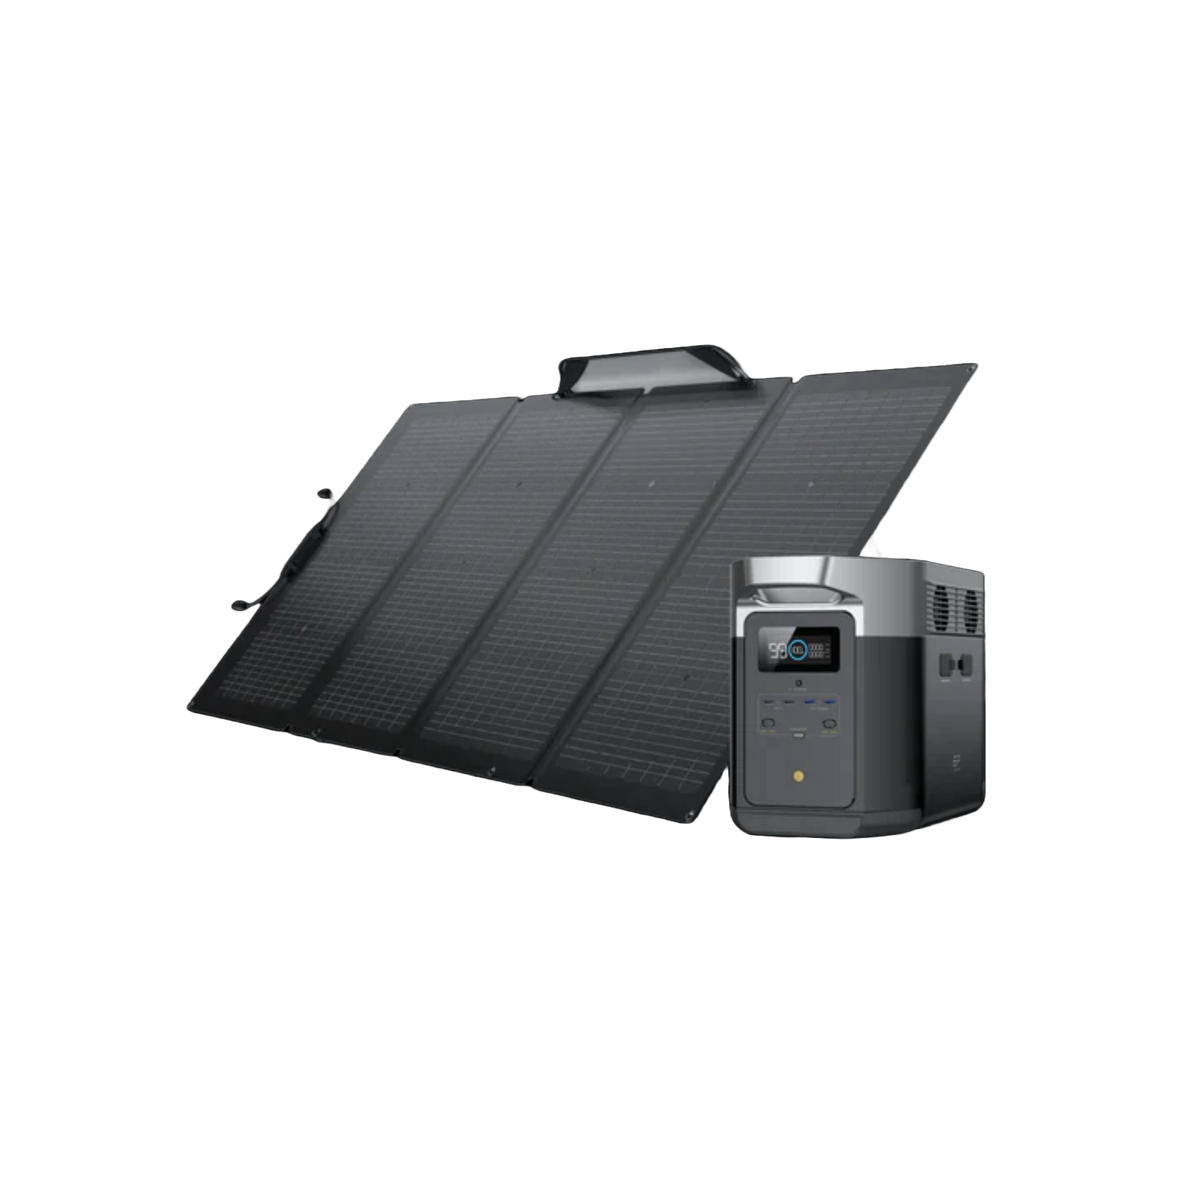 EcoFlow DELTA Max 1600 Portable Power Station with 220W Solar Panels